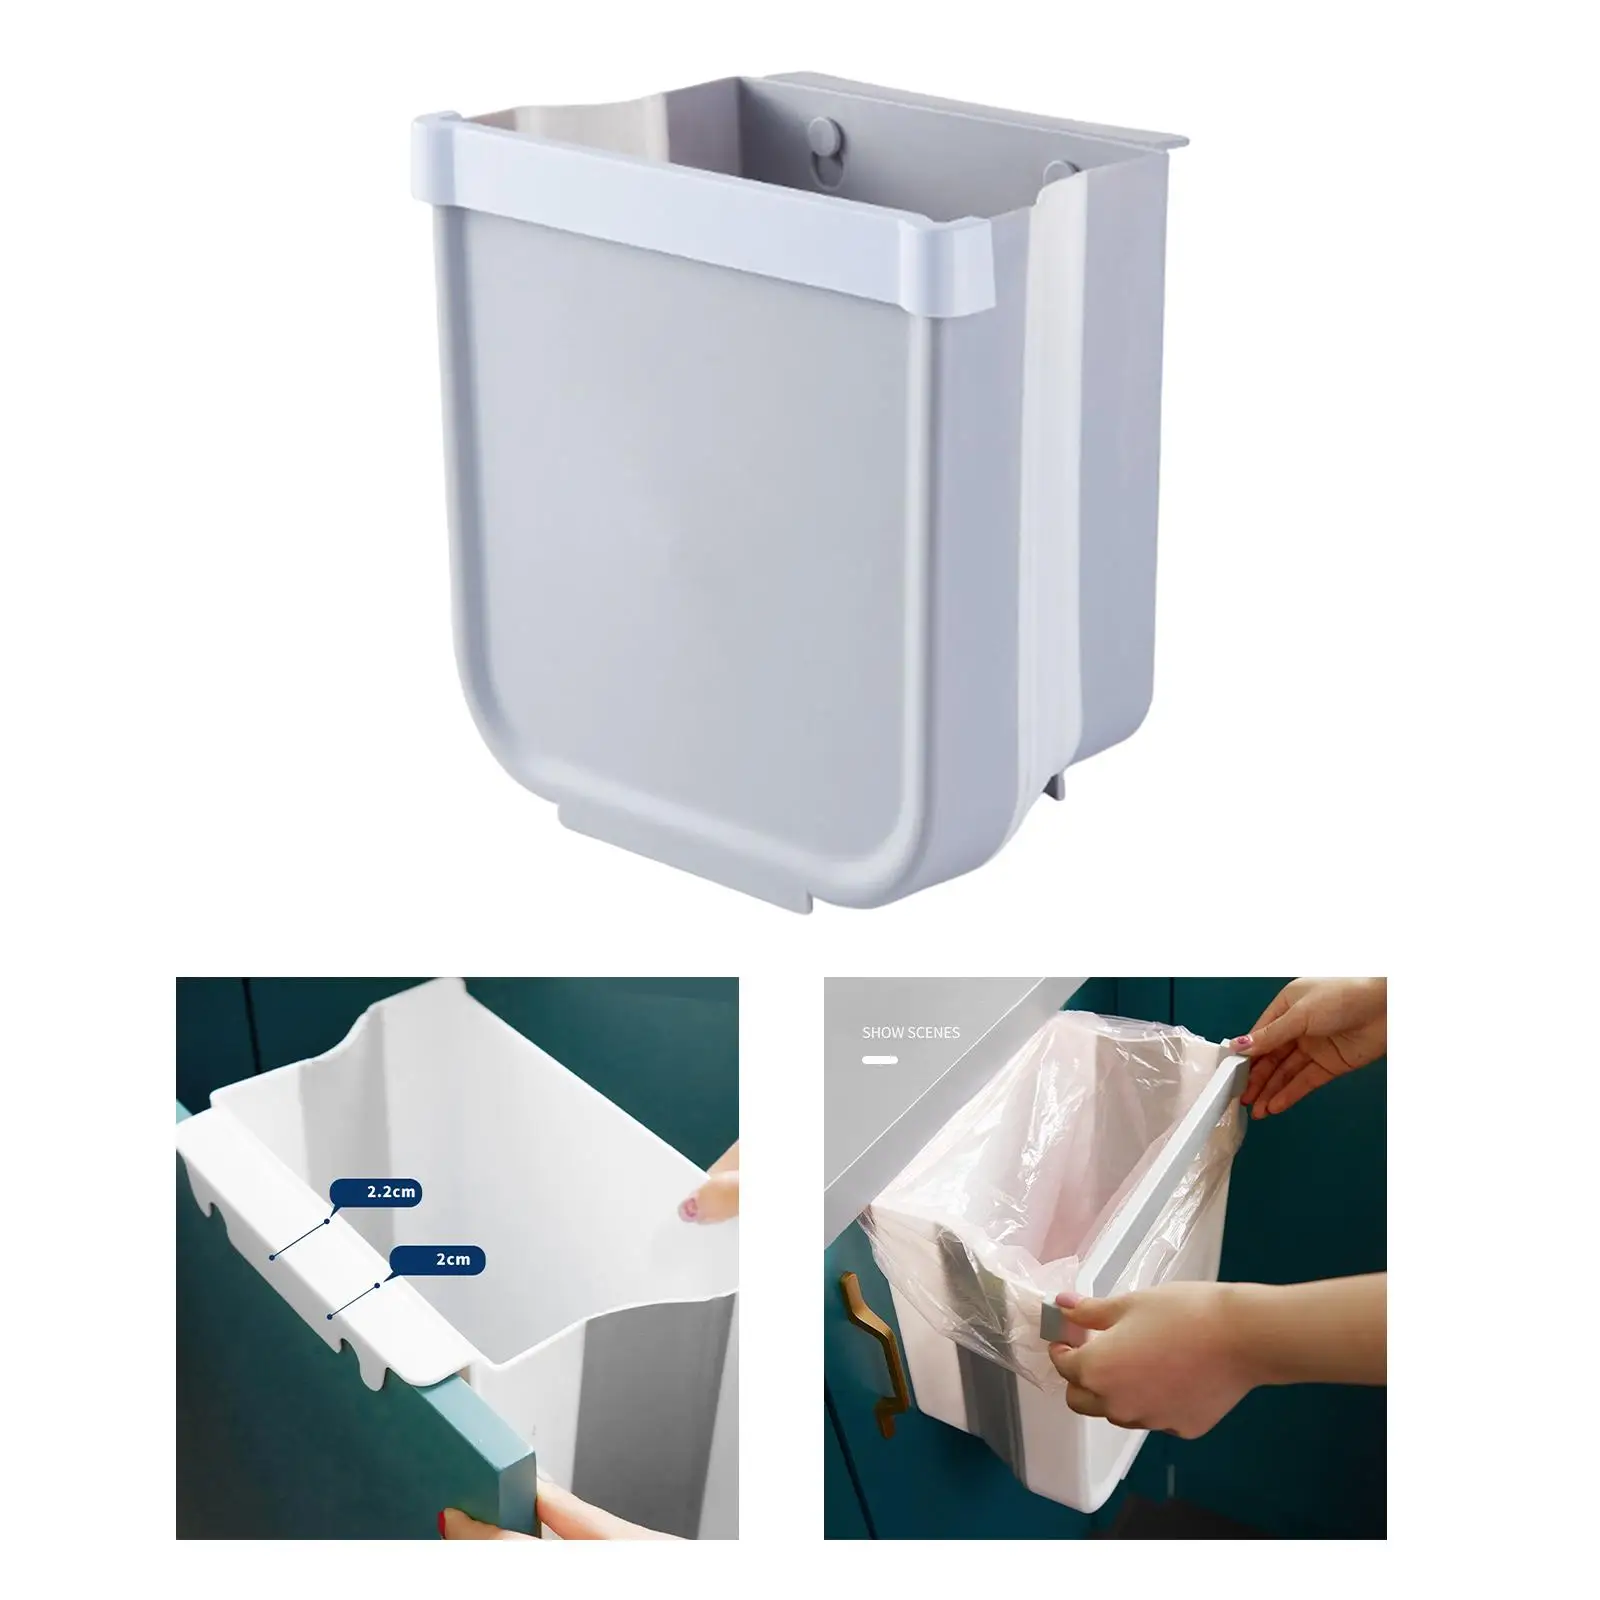 Foldable Wall Mounted Trash Can Hanging Waste Bin Dust Bin Recycle Rubbish Bin for Kitchen Cabinet Outdoor Travel Camping Car